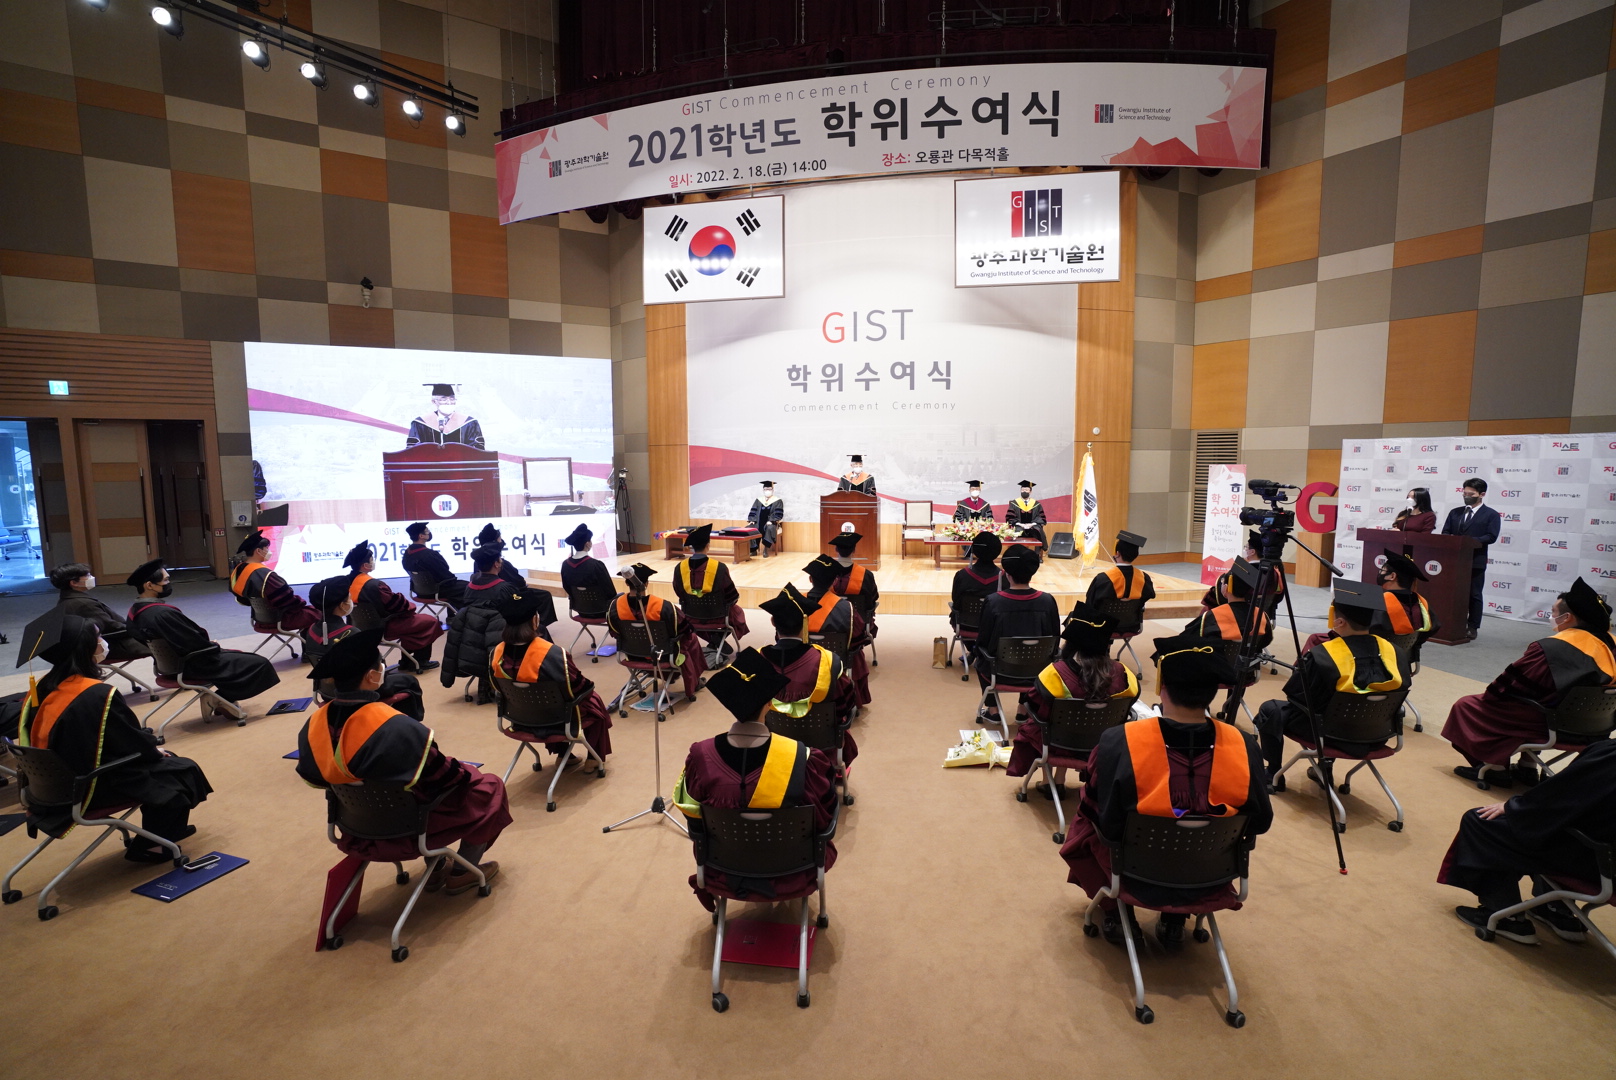 GIST hosts degree conferment ceremony for the 2021 academic year 이미지